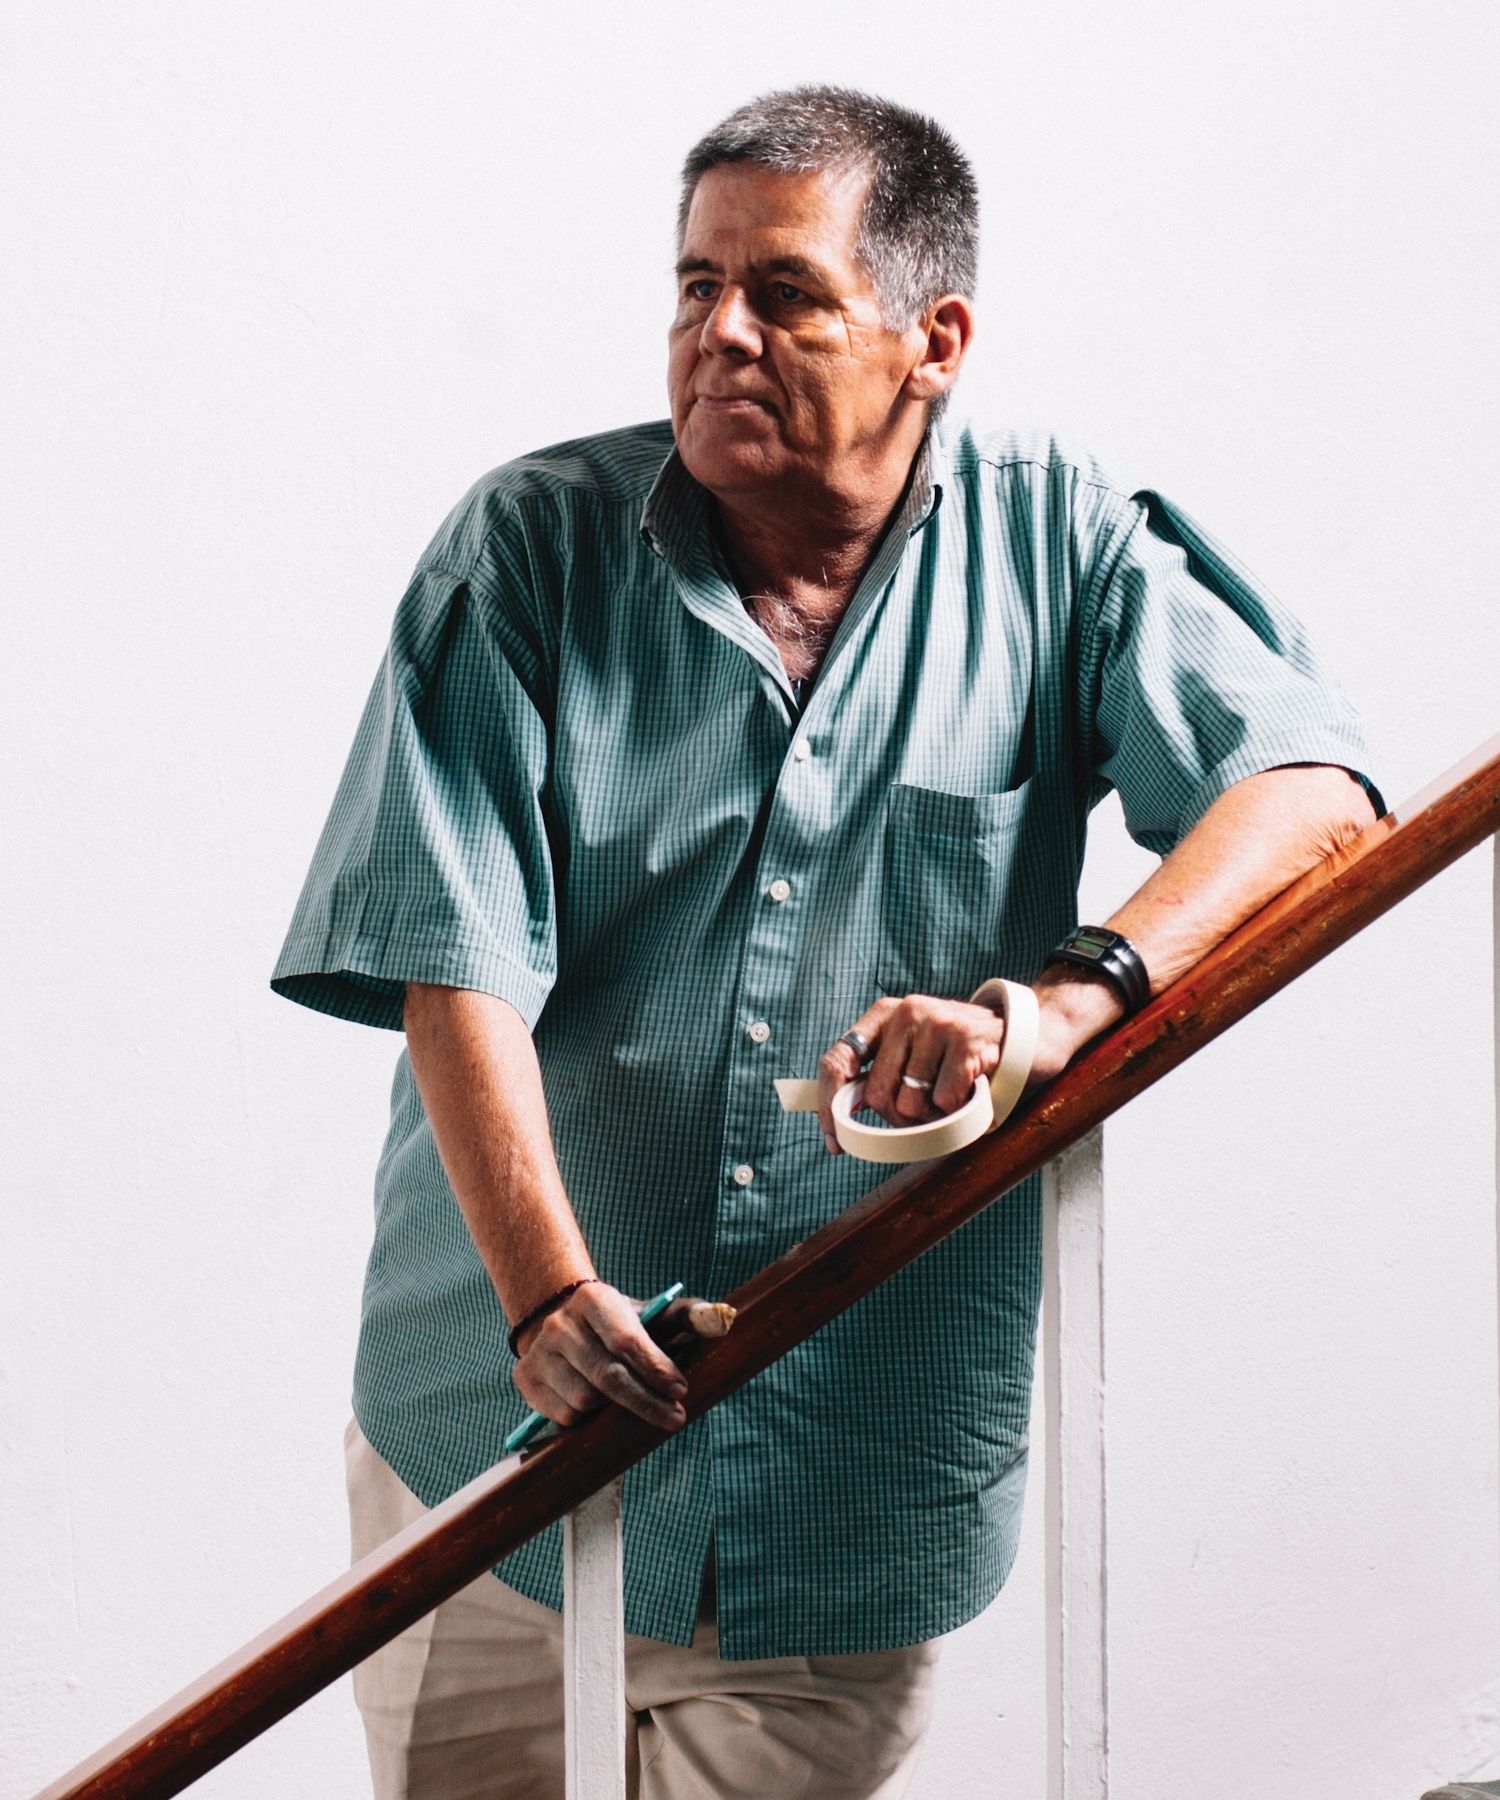 Portrait of a man resting on a staircase bannister holding a pencil in one hand and rolls of masking tape in the other.